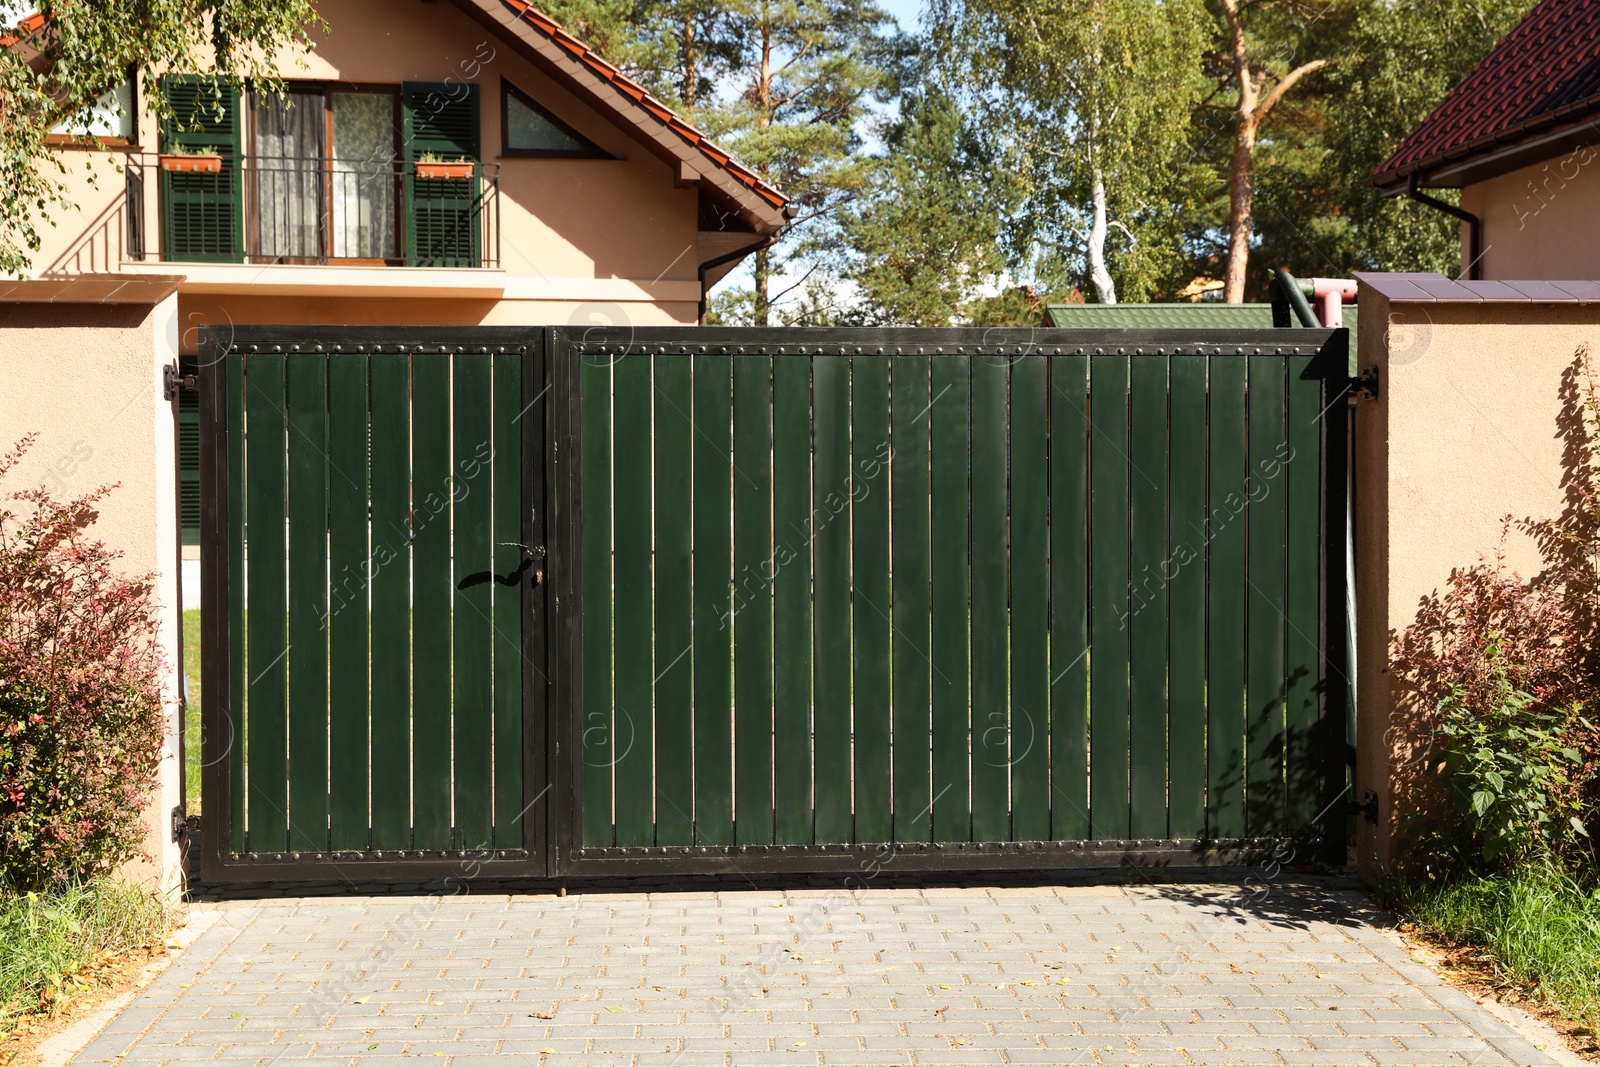 Photo of Green gates near house and trees outdoors